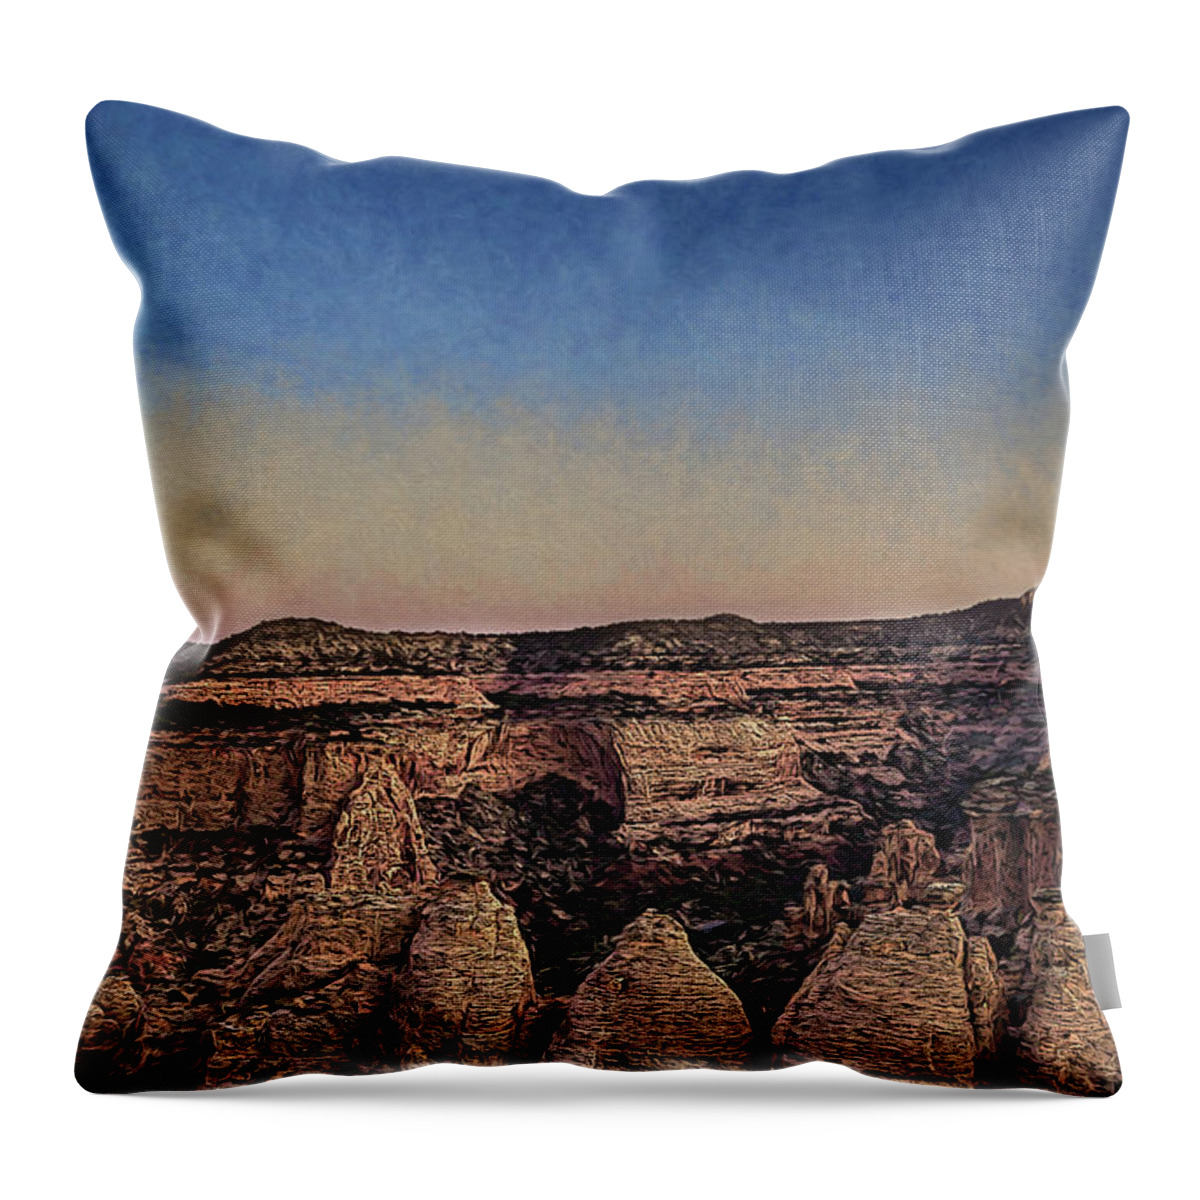 Photographs Throw Pillow featuring the photograph Colorado National Monument - Coke Ovens by John A Rodriguez